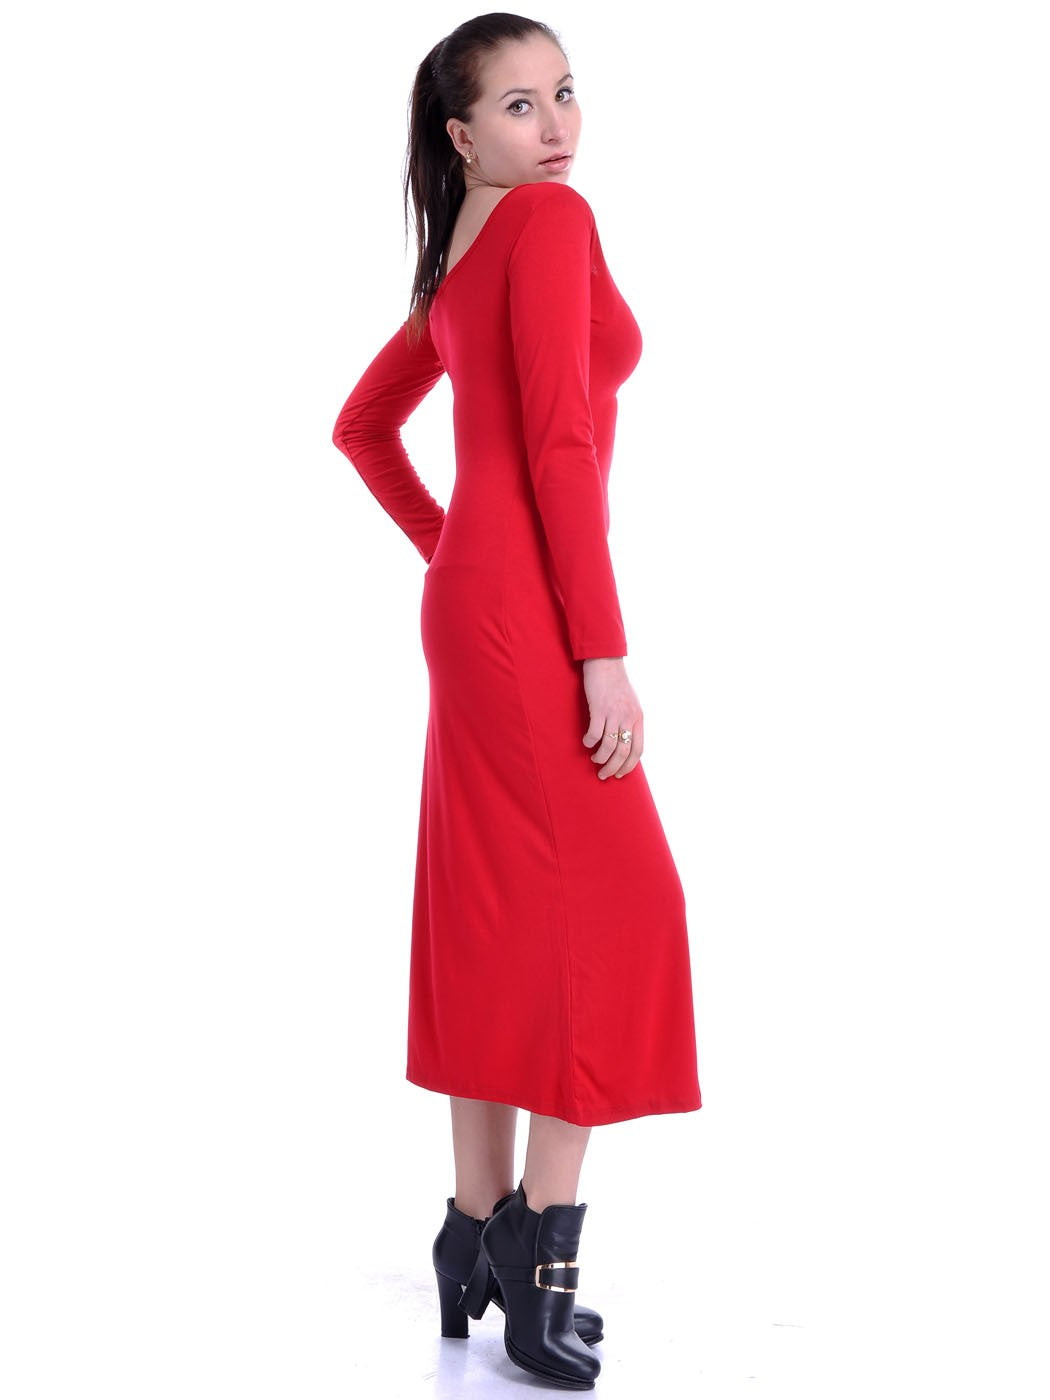 Red Simple Yet Chic 90's Inspired Stretch Fit Long Maxi Dress